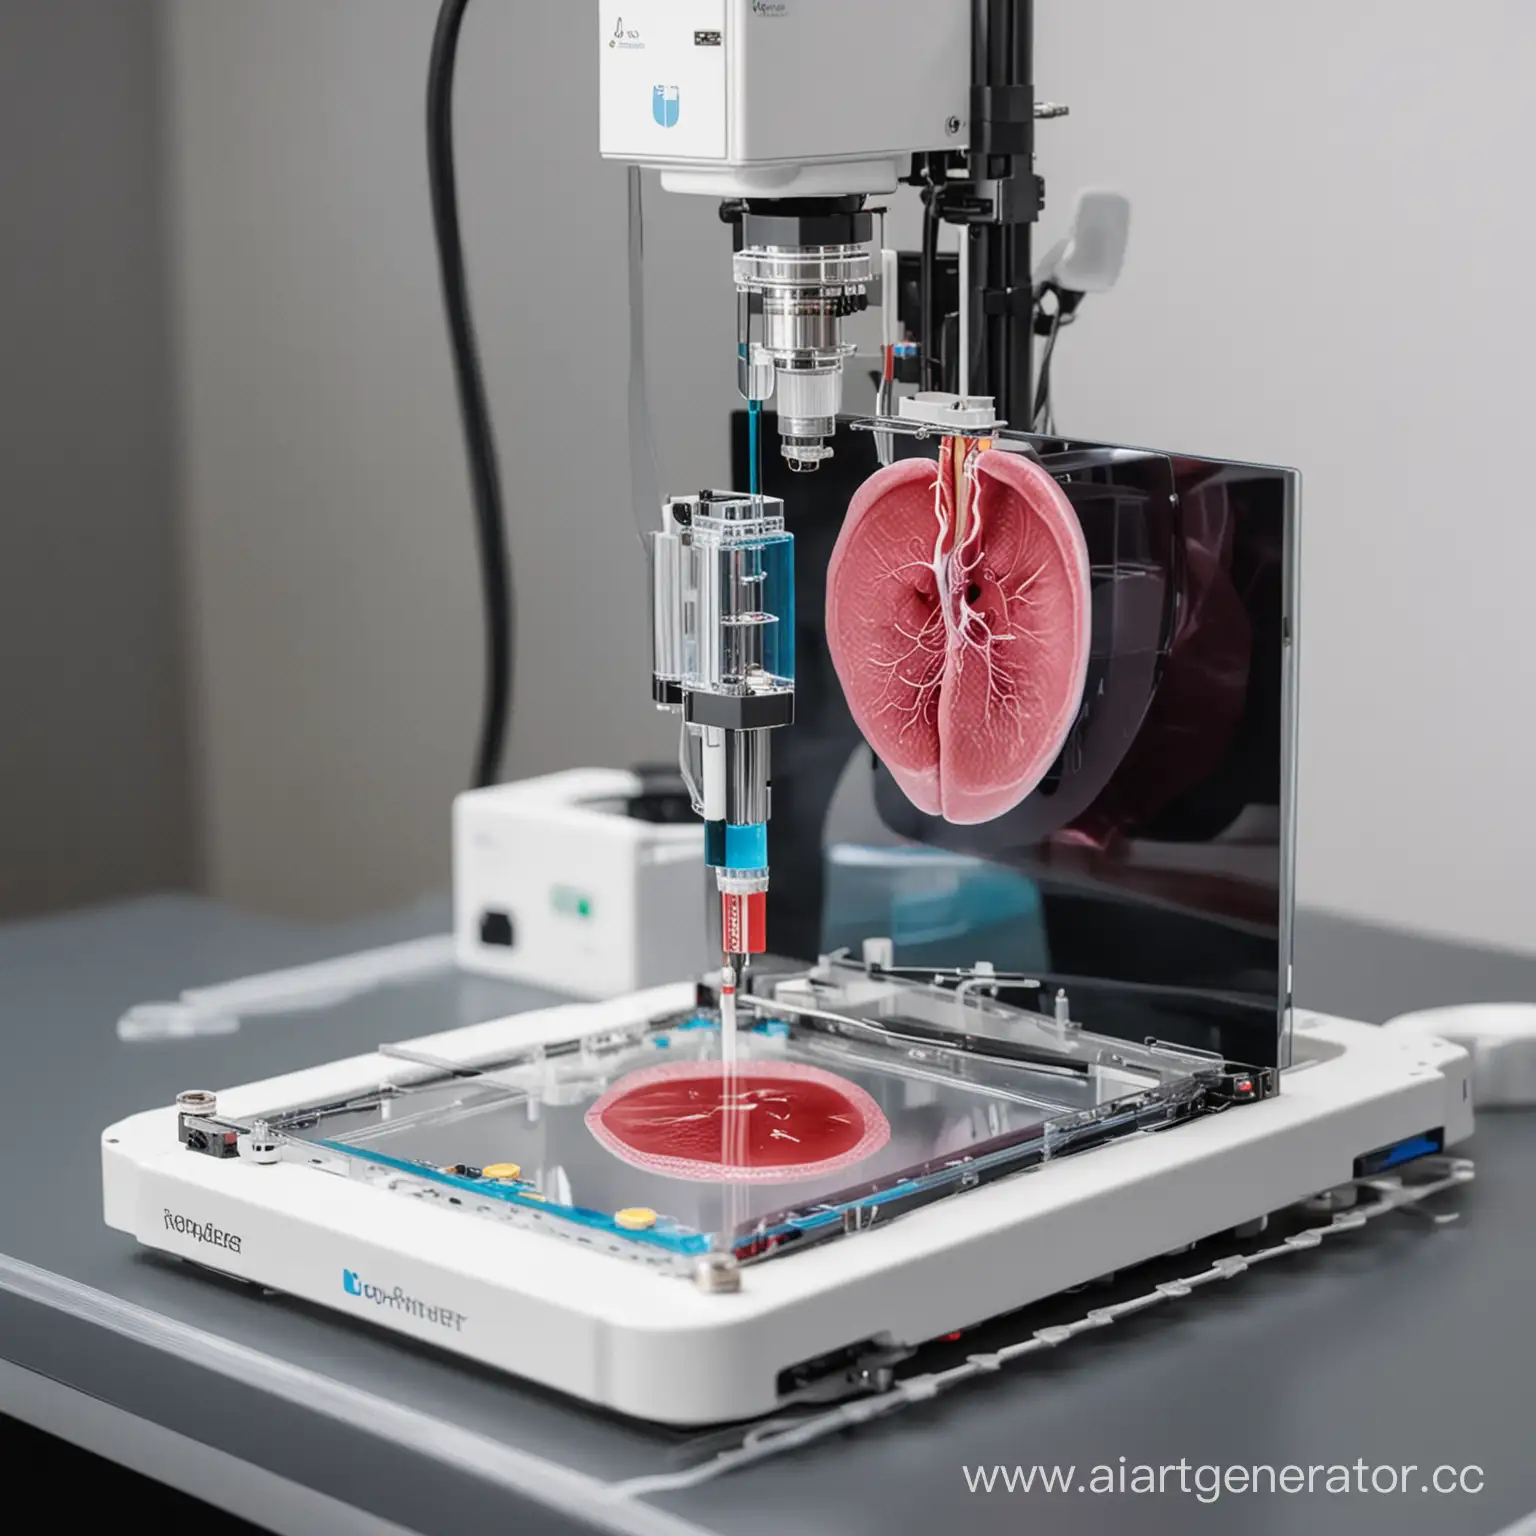 Advanced-Bioprinter-Creating-Organs-for-Patients